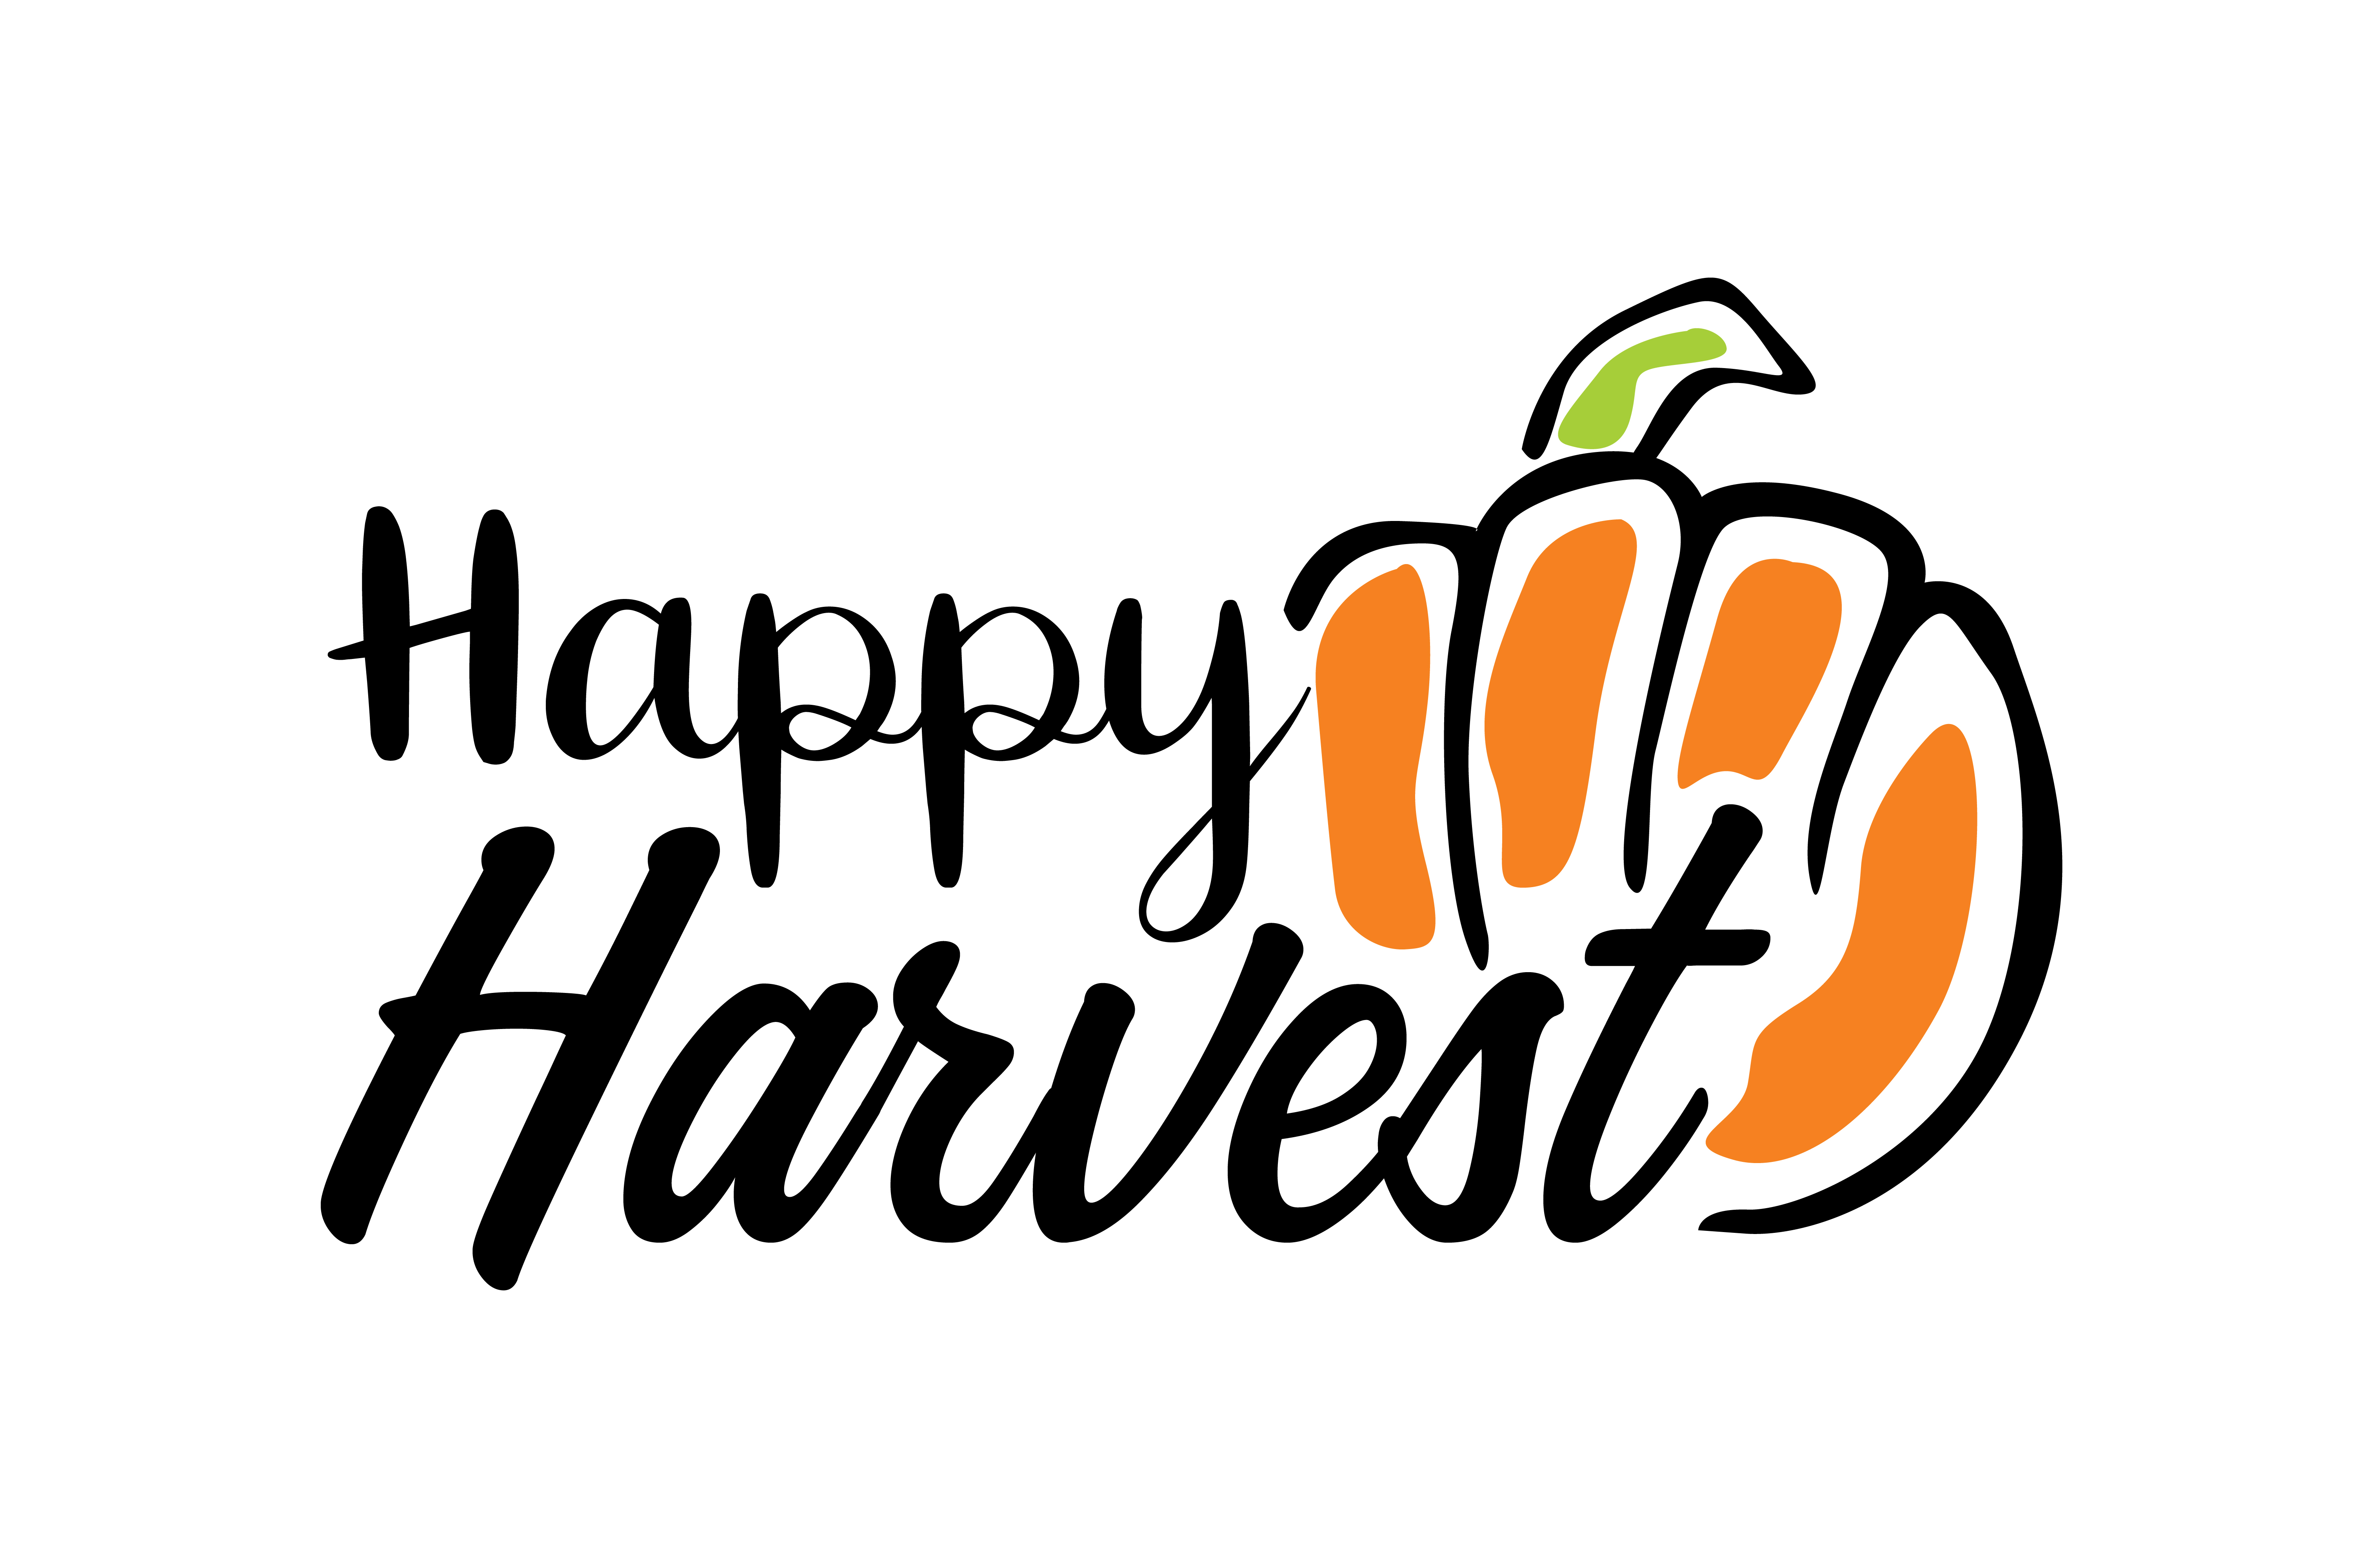  Harvest  clipart happy  pictures on Cliparts Pub 2022 